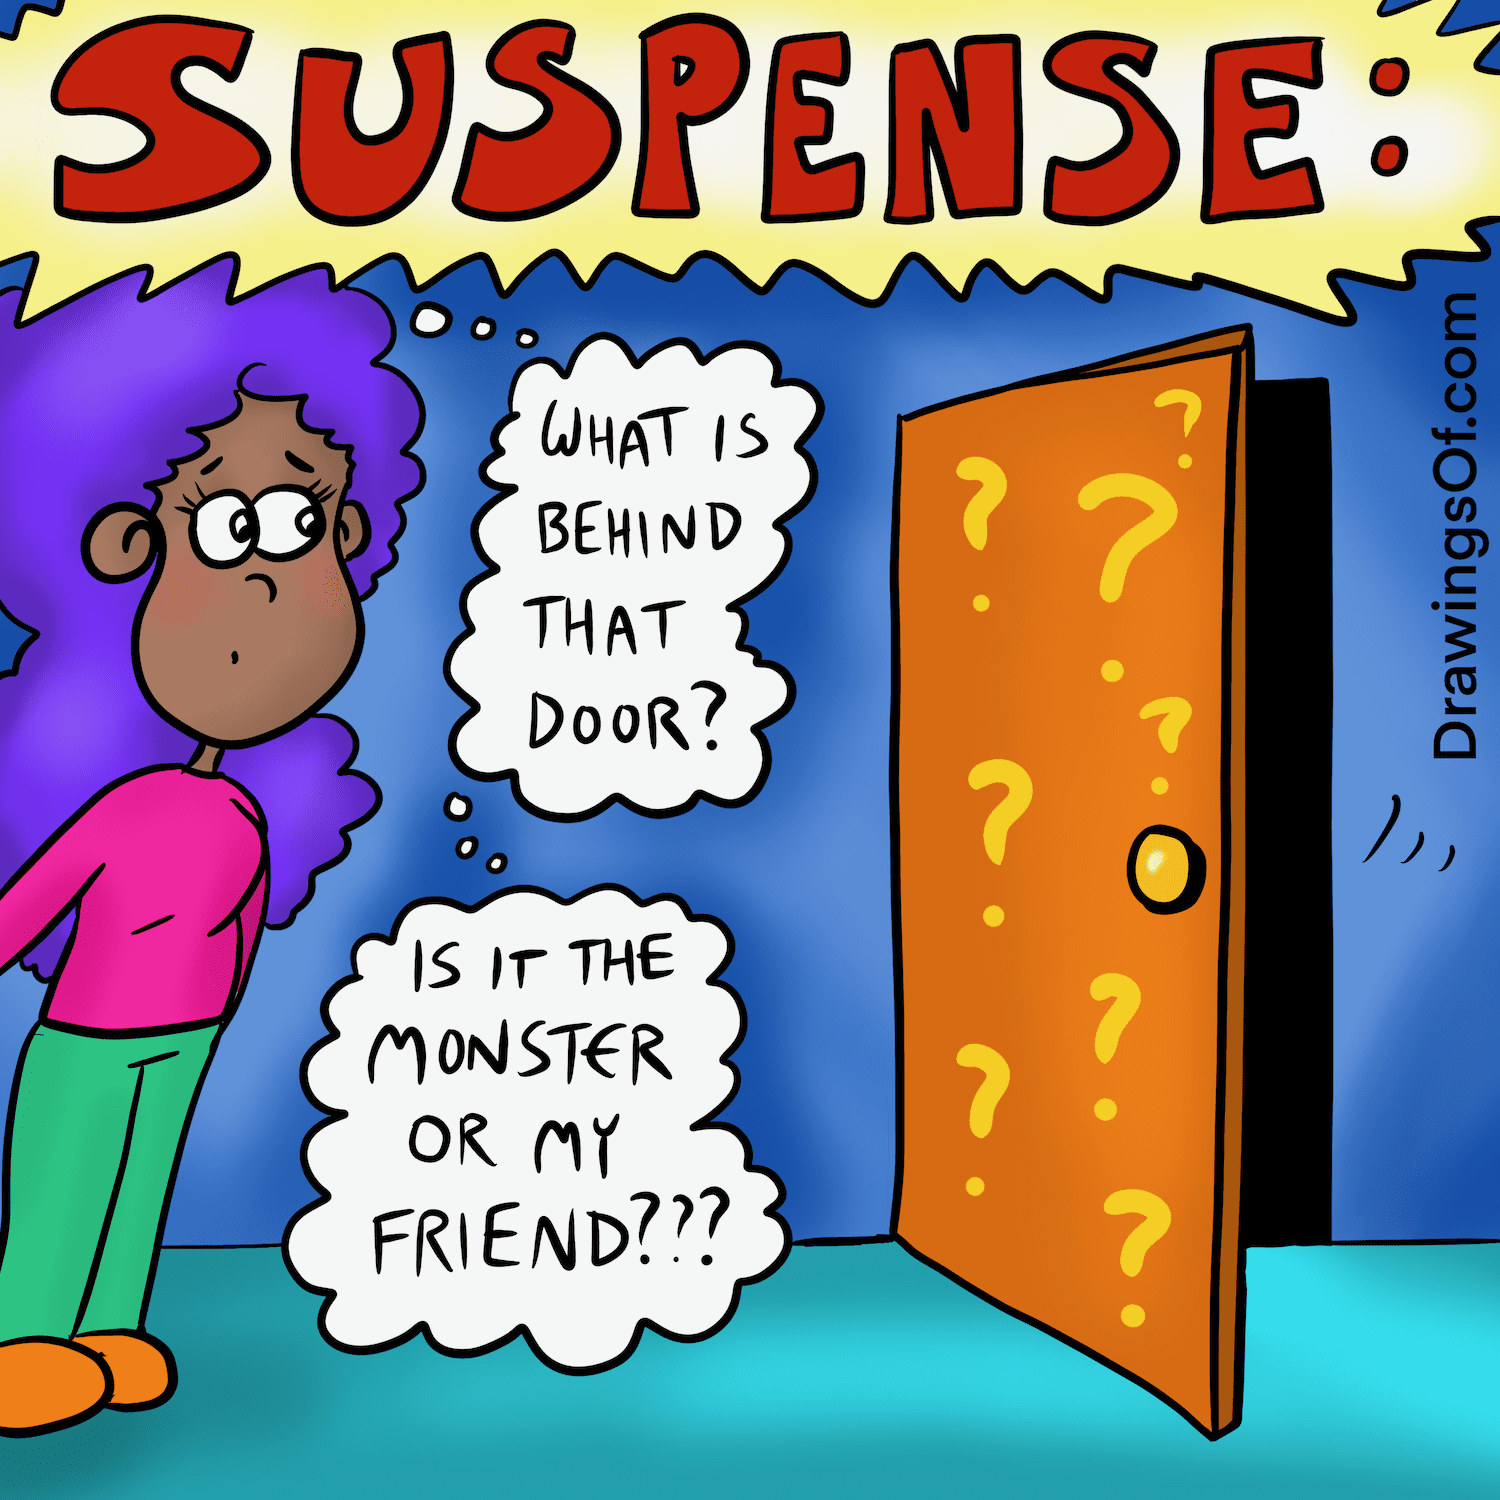 A suspense example, illustrated.